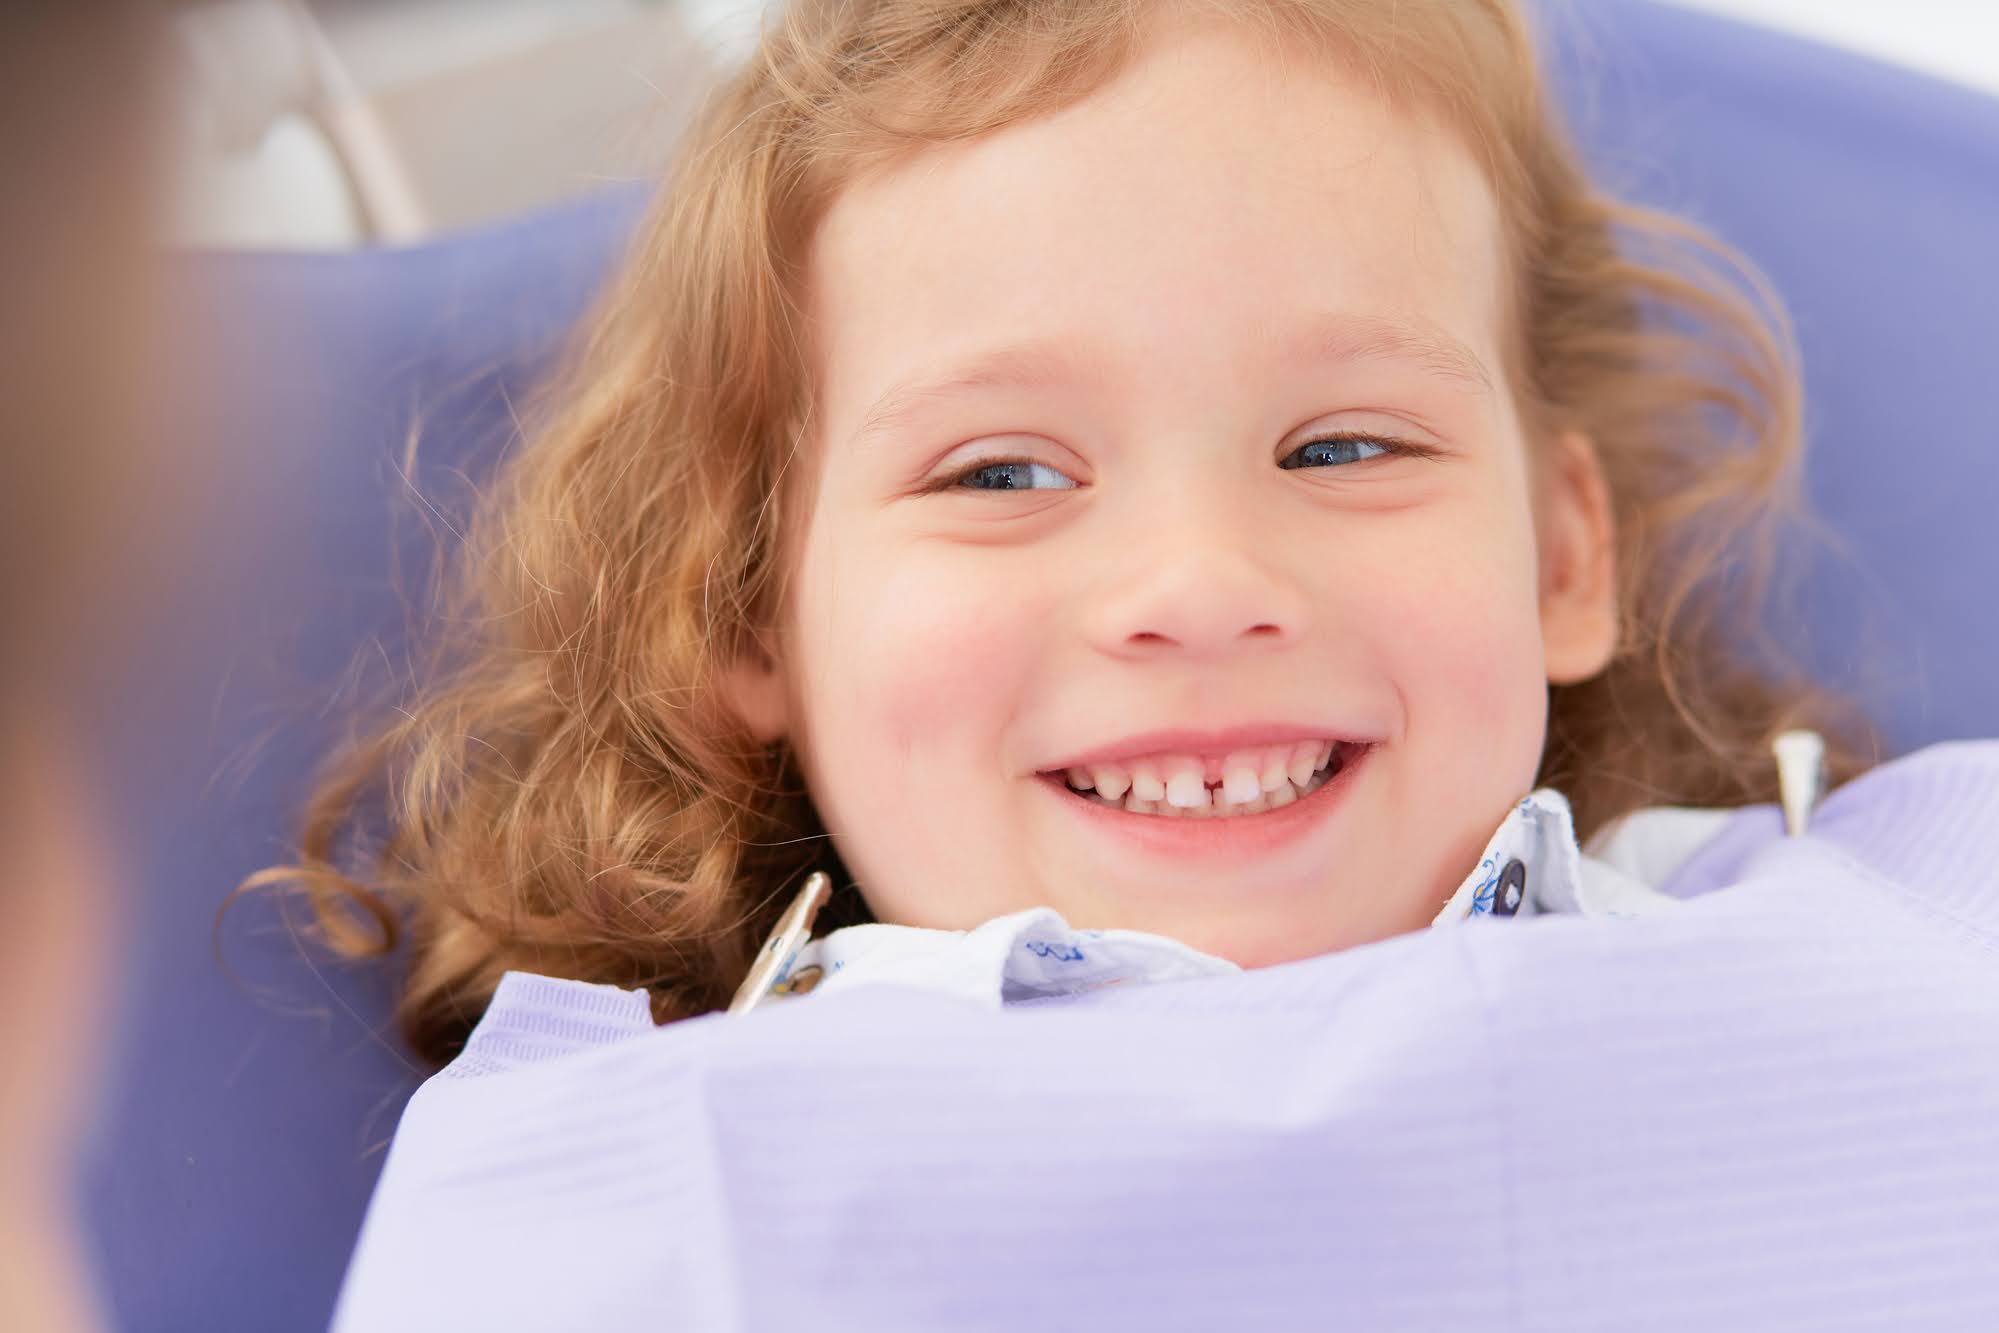 This is the image for the news article titled Ways To Encourage Good Dental Hygiene in Your Children